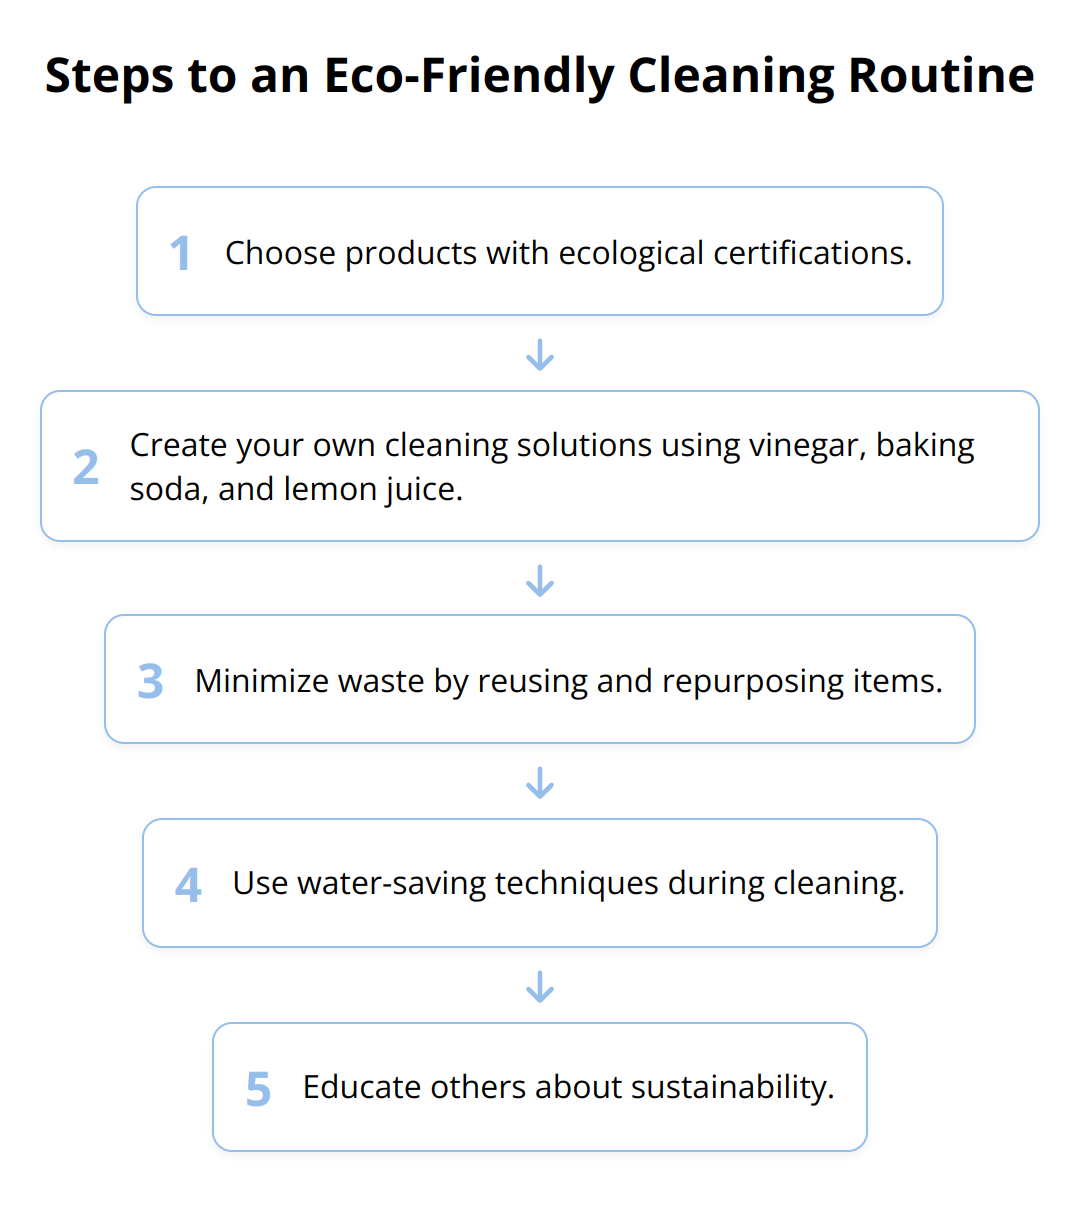 Flow Chart - Steps to an Eco-Friendly Cleaning Routine